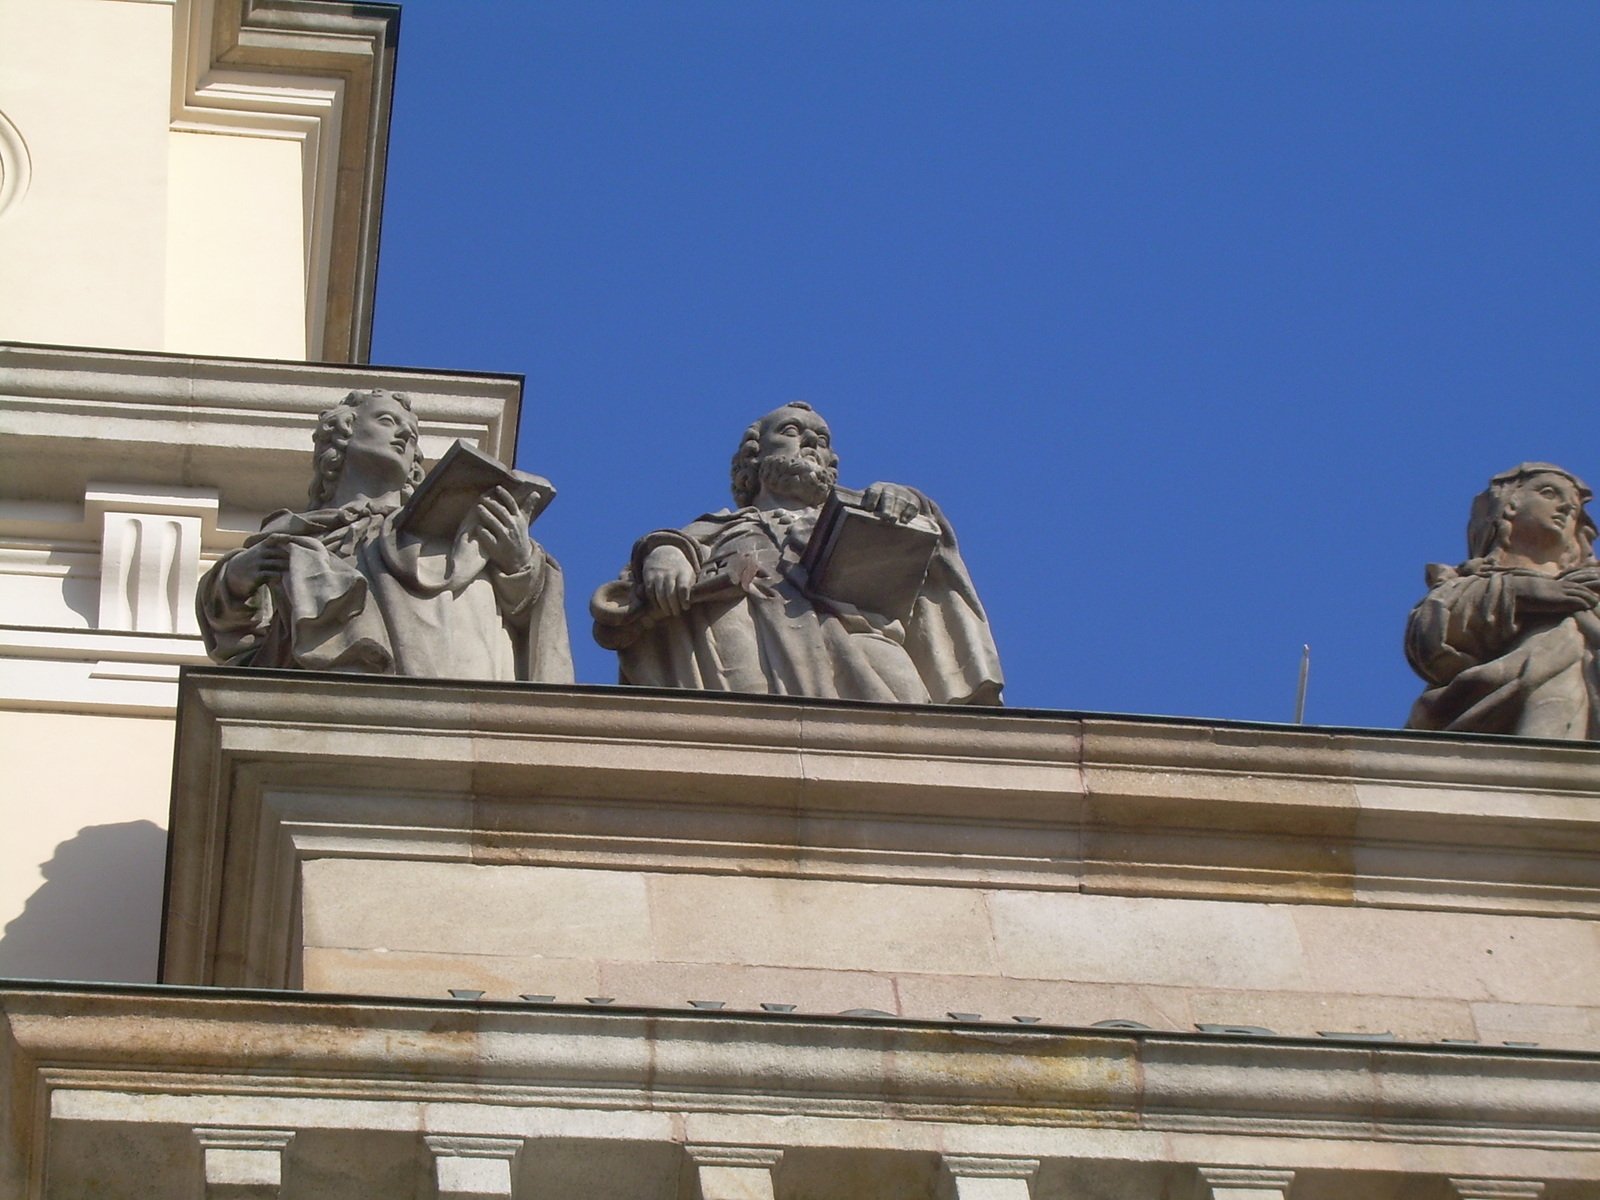 statues of men on a building on a clear day